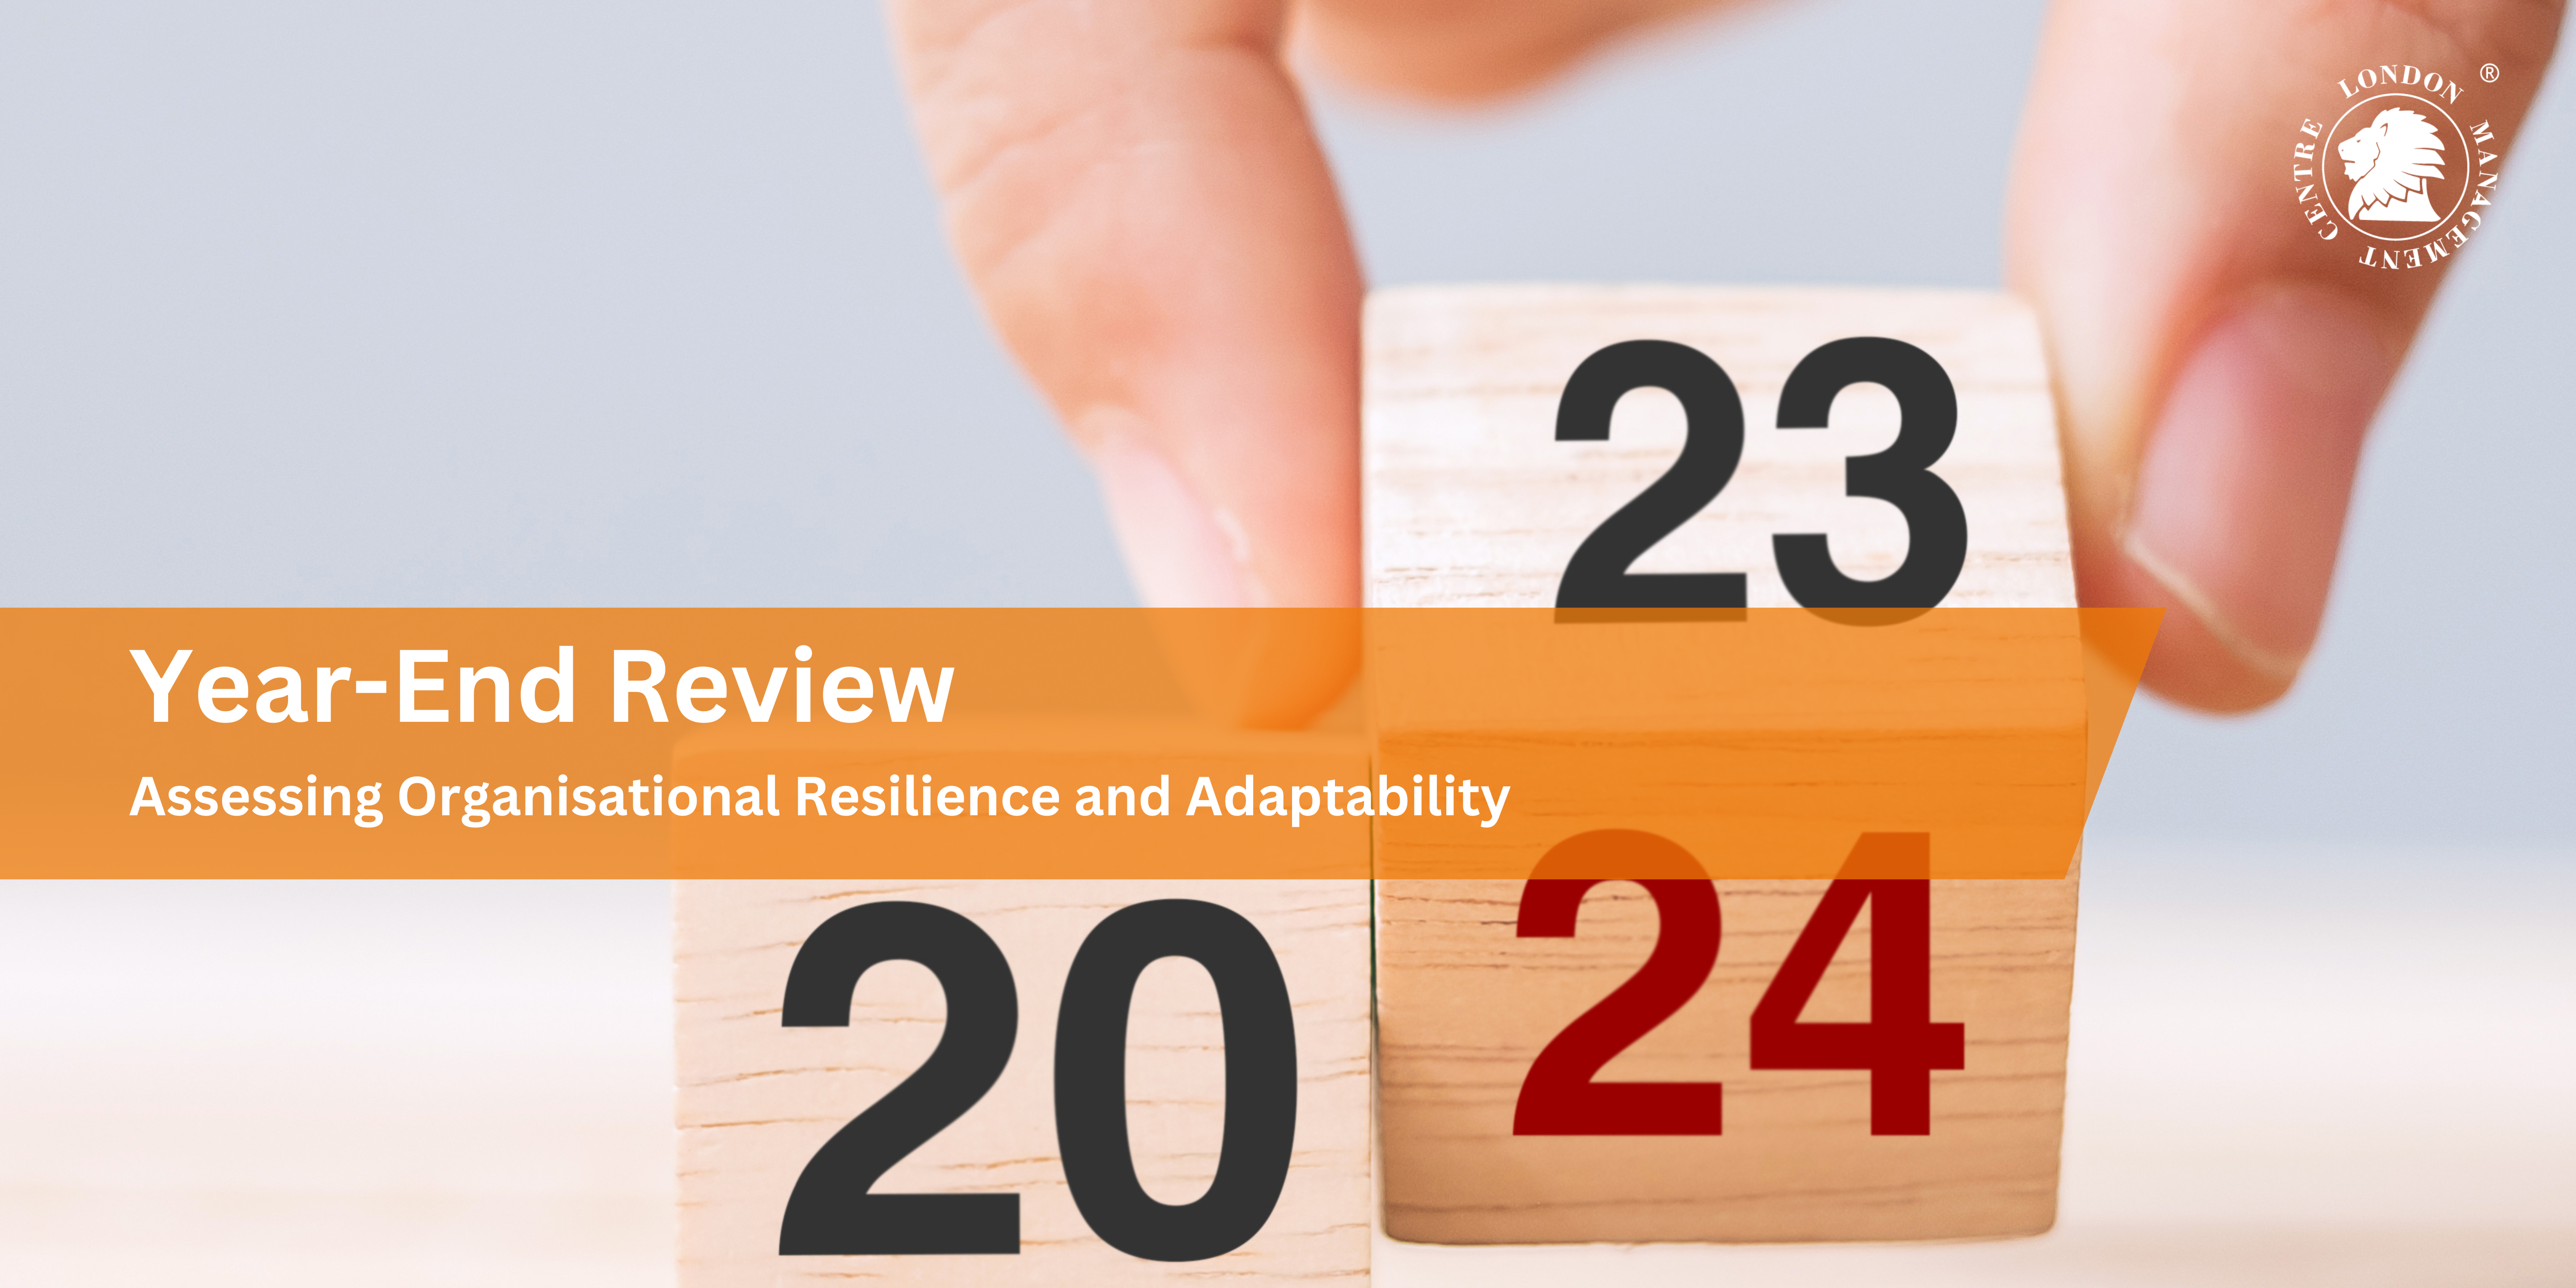 Year-End Review: Assessing Organisational Resilience and Adaptability